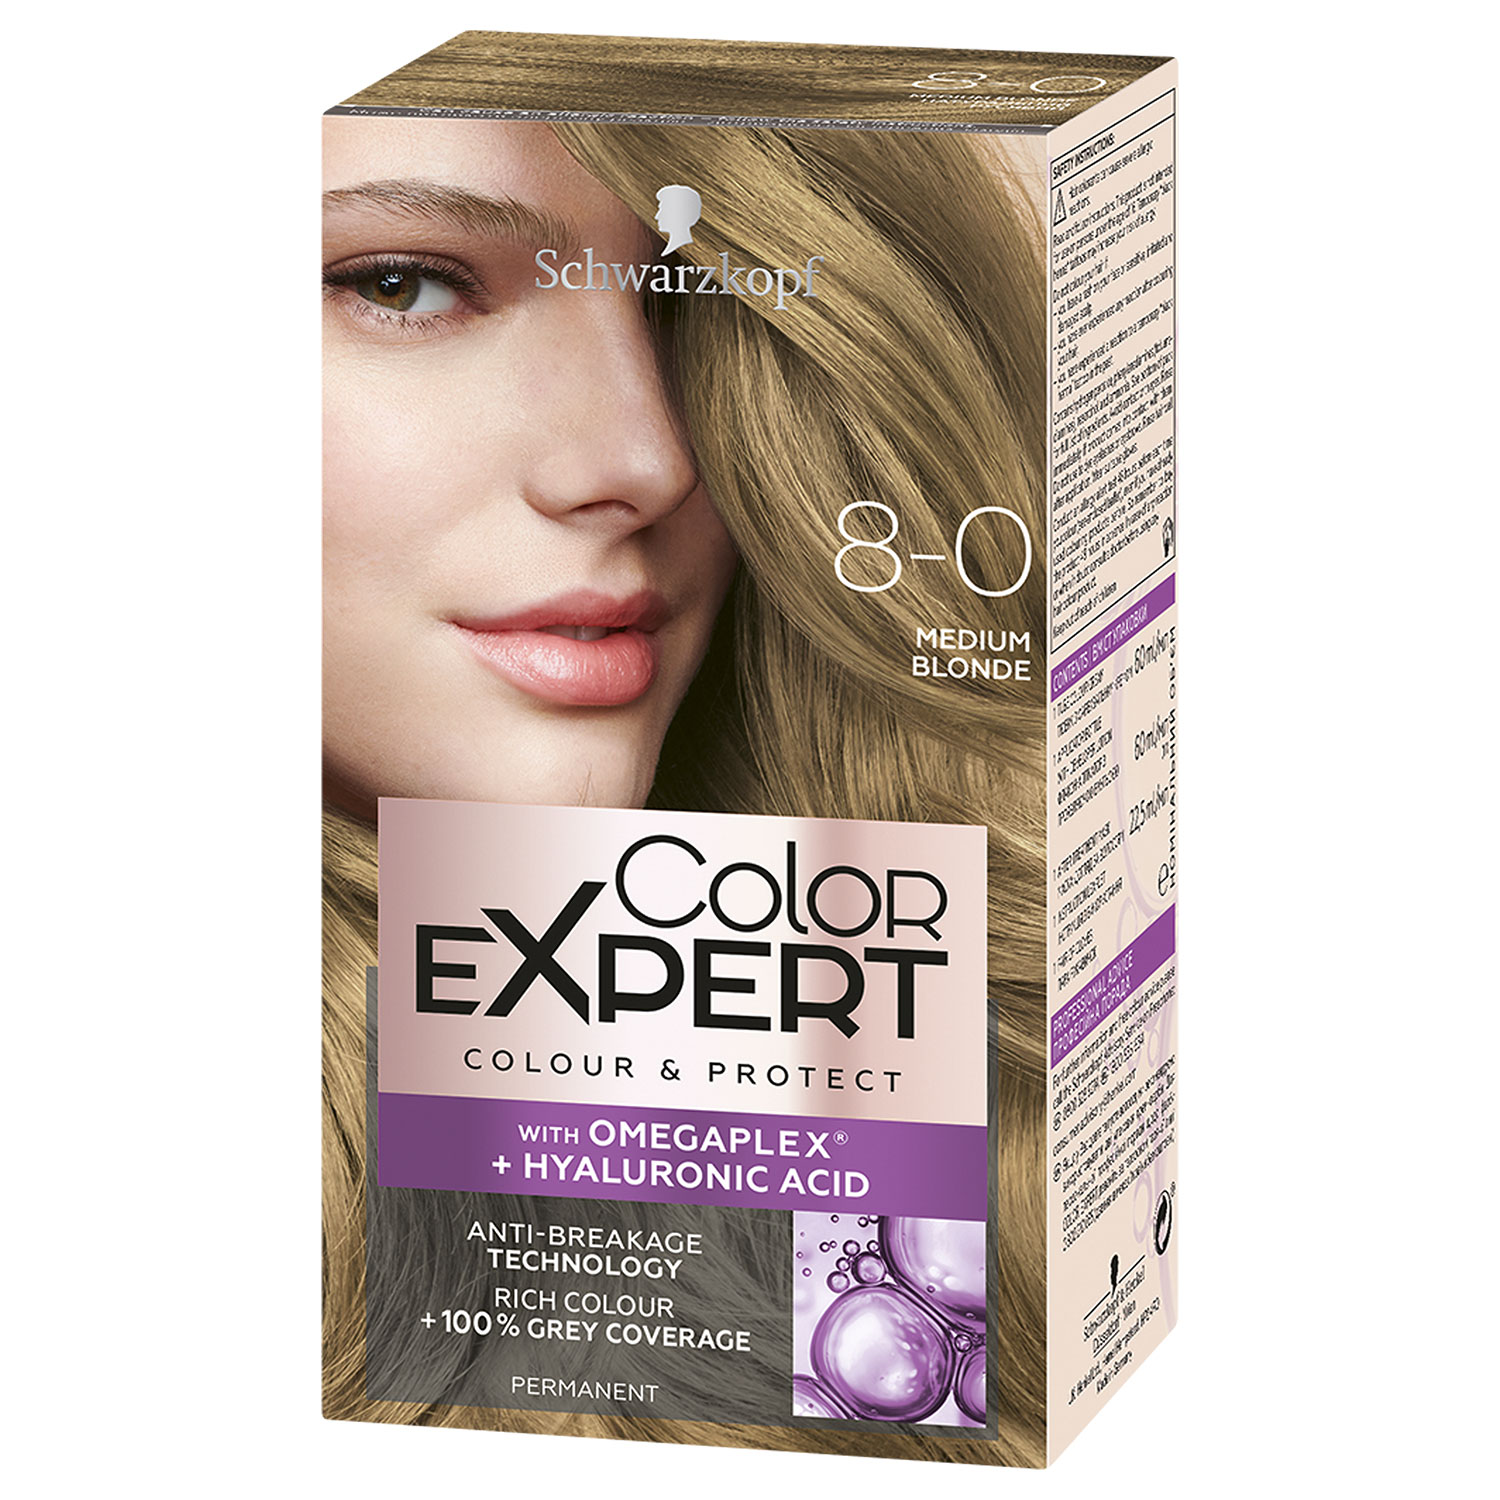 Color Expert 8-0 Natural Light Brown With Hyaluronic Acid Cream-Hair-Dye 142.5ml